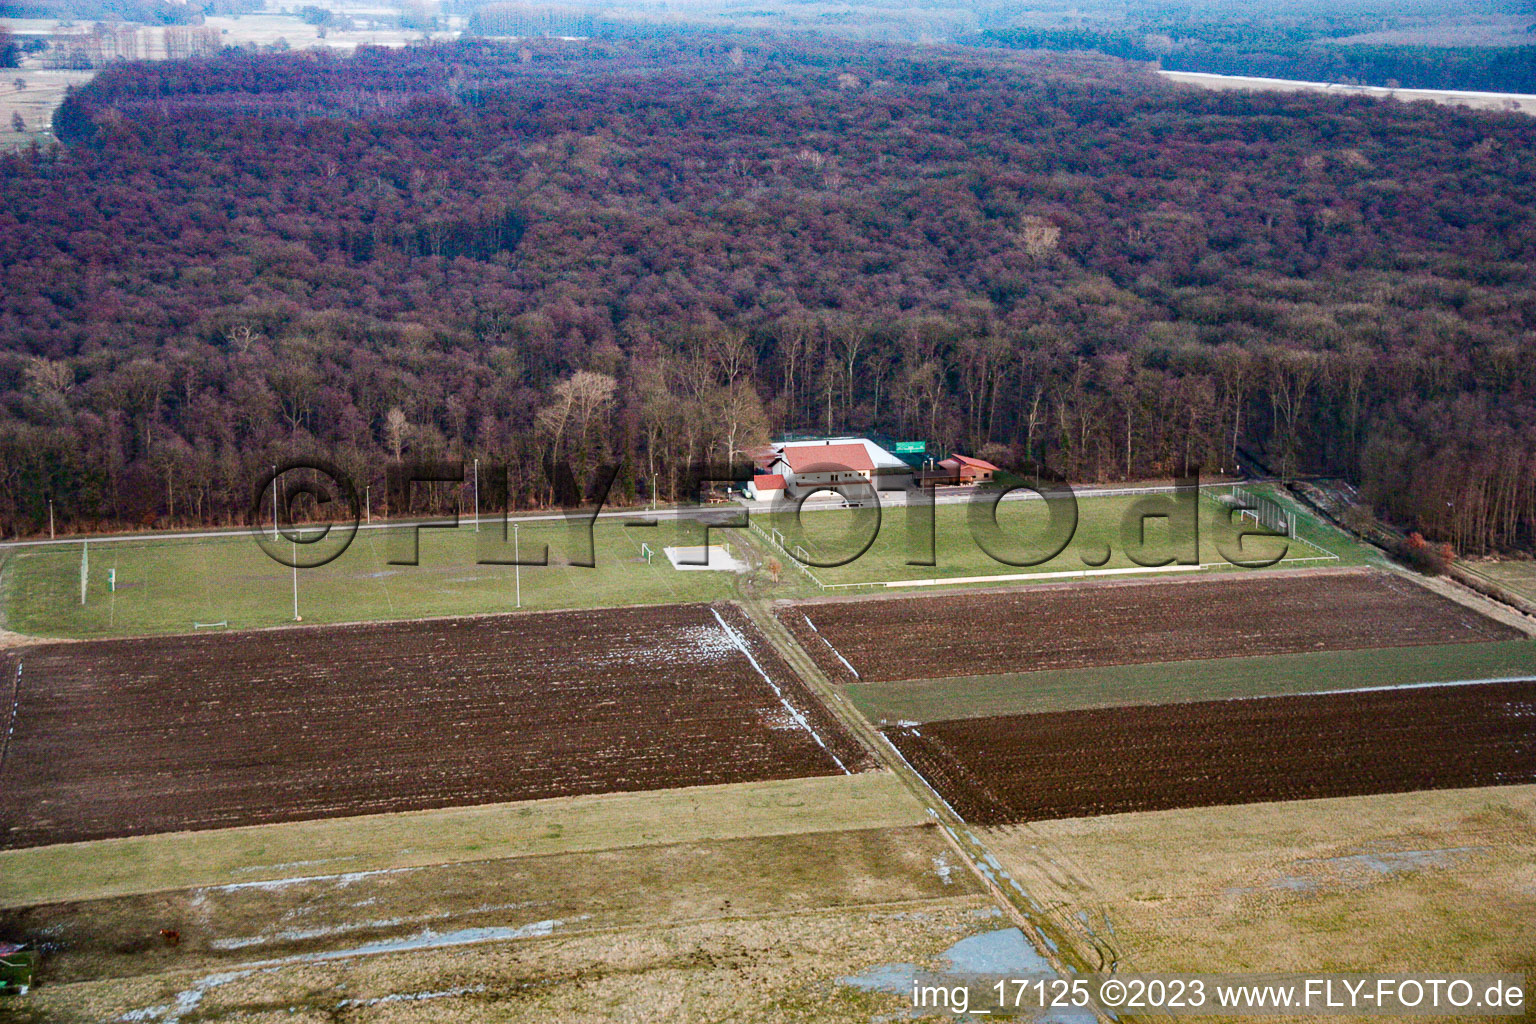 Aerial view of Sports fields in Freckenfeld in the state Rhineland-Palatinate, Germany